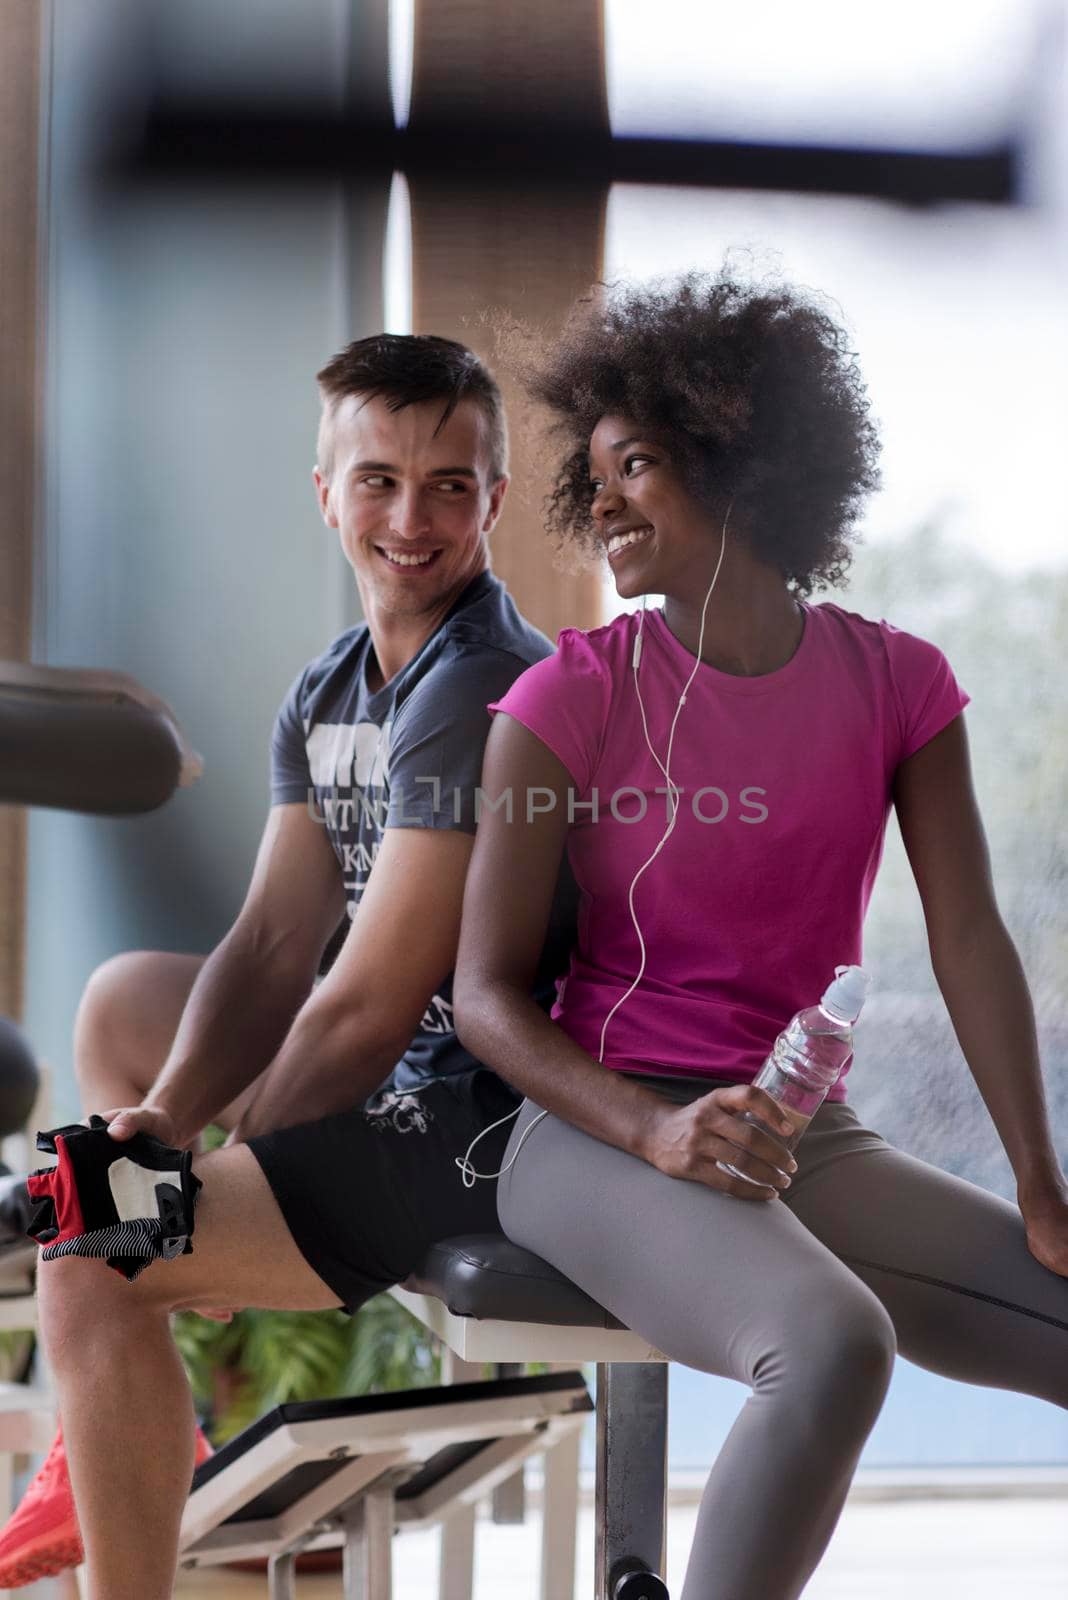 healthy couple have break  at  crossfit gym african  american woman with afro hairstyle